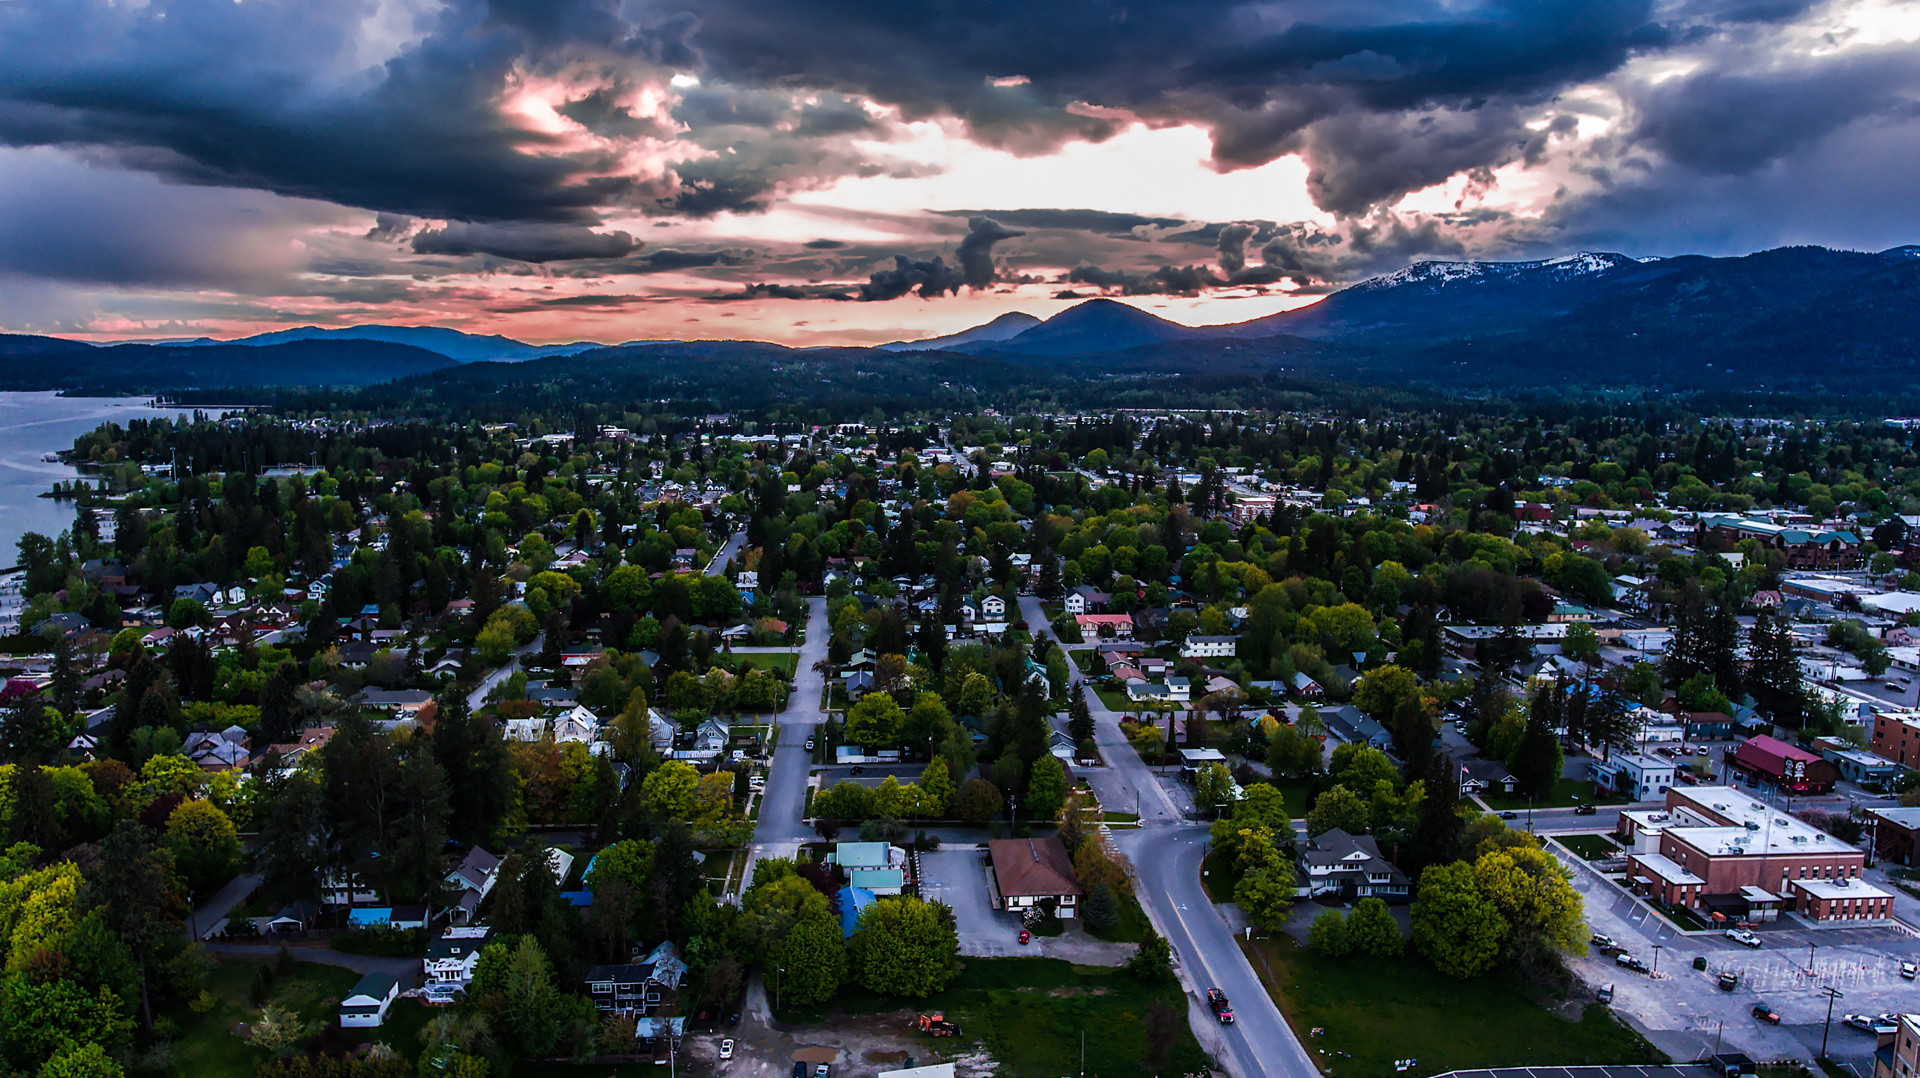 Town of Sandpoint Drone 5-18-17